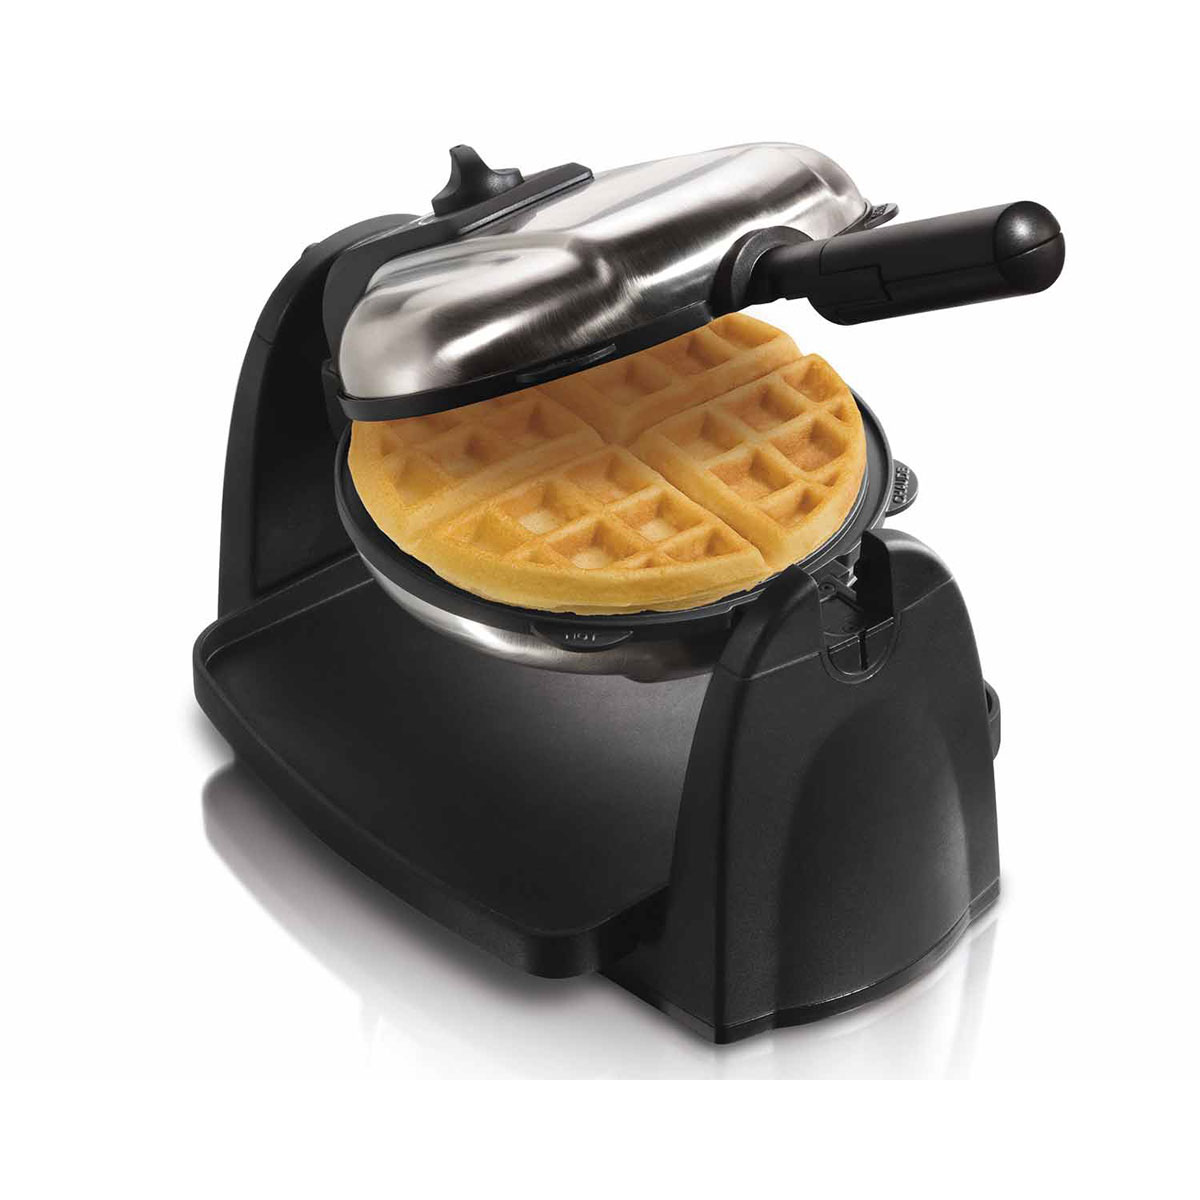 Flip Belgian Waffle Baker with Removable Grids (26030C)